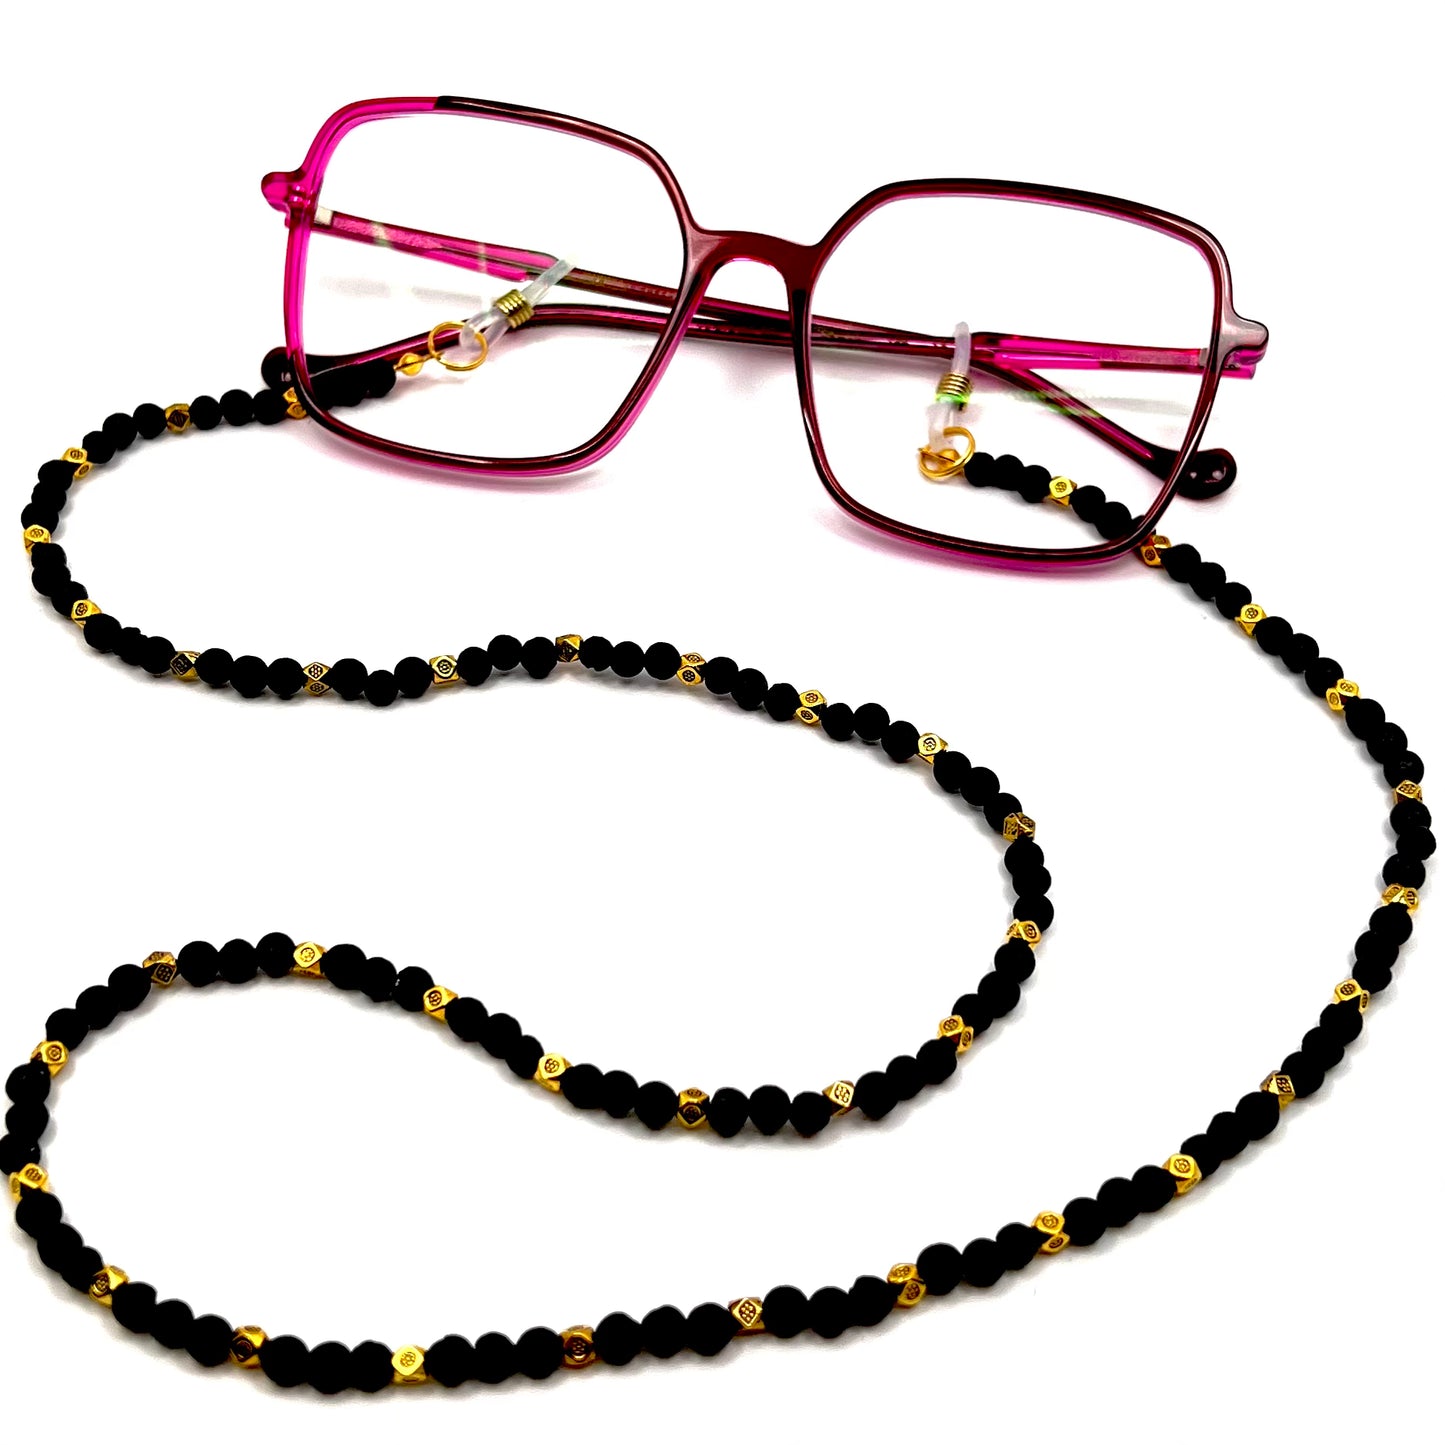 Chain for Glasses